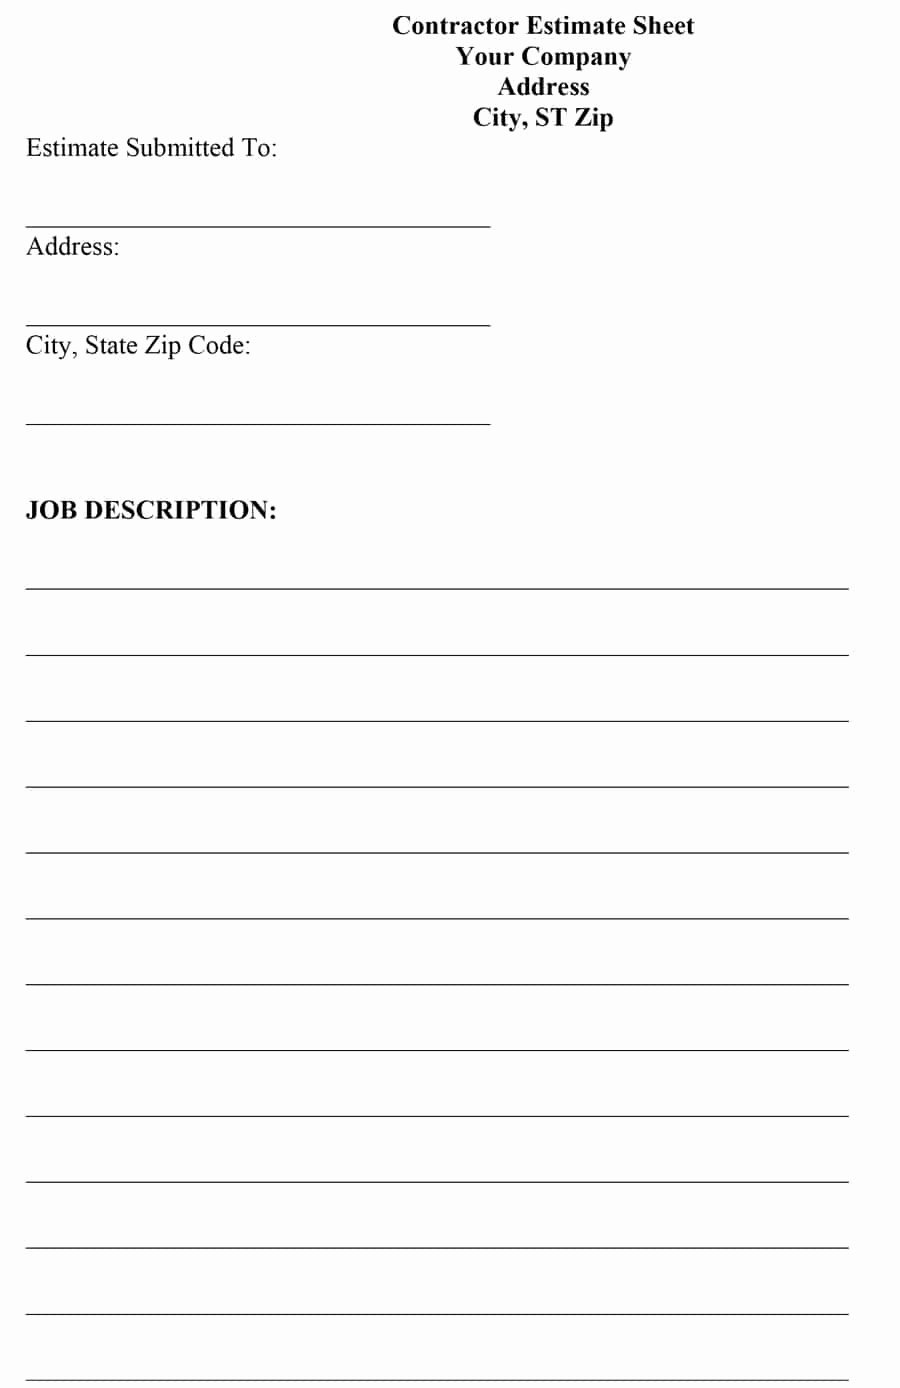 Free Proposal form Template New 44 Free Estimate Template forms [construction Repair